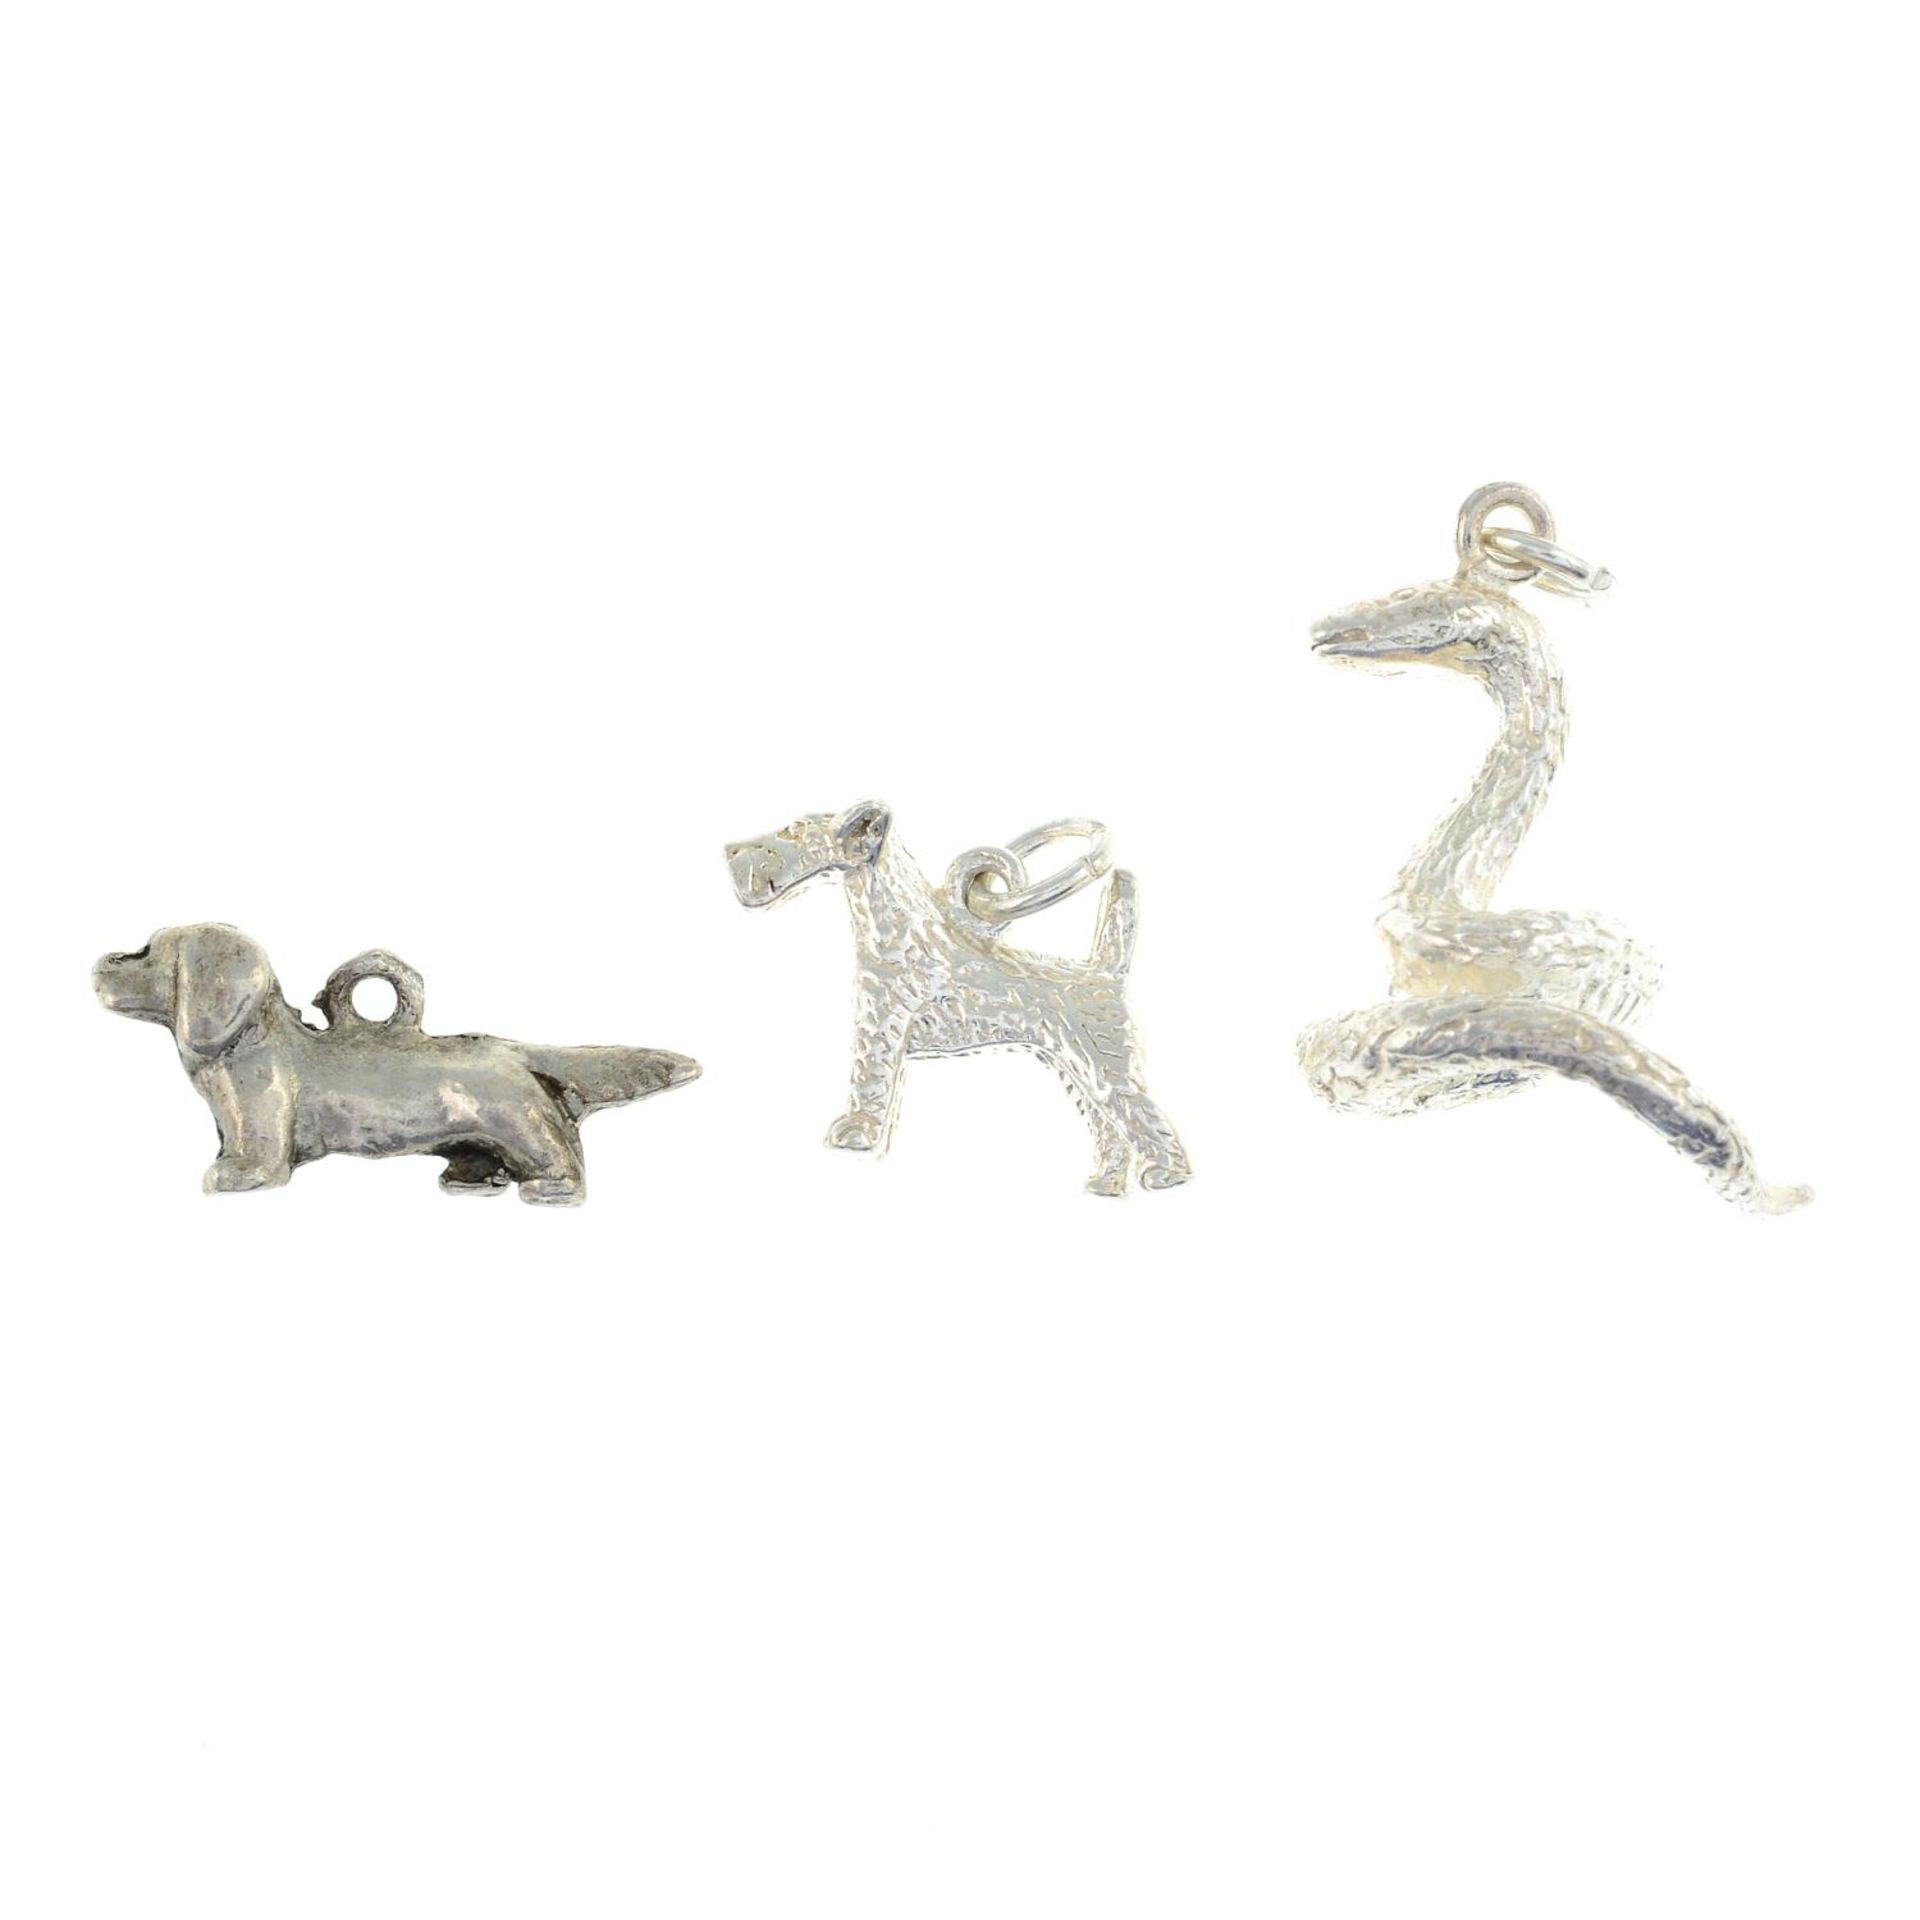 A selection of charms, to include a charm of a Sussex spaniel, a snake and a box terrier.